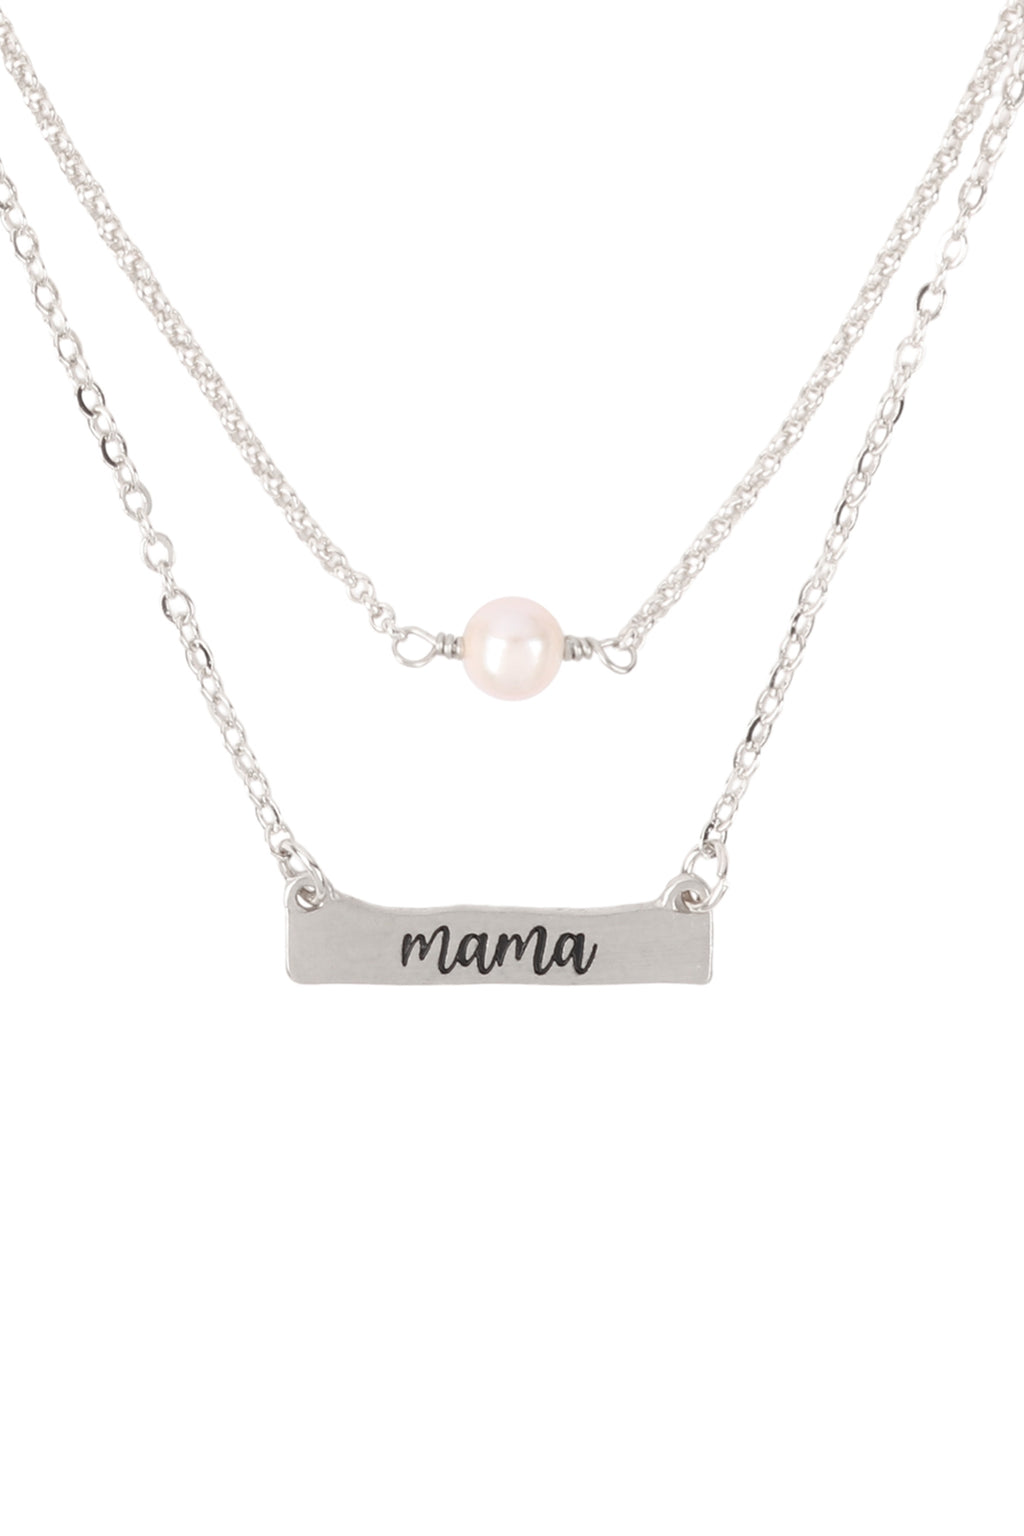 "Mama" Inspirational Pearl 3 Set Necklace Matte Silver - Pack of 6